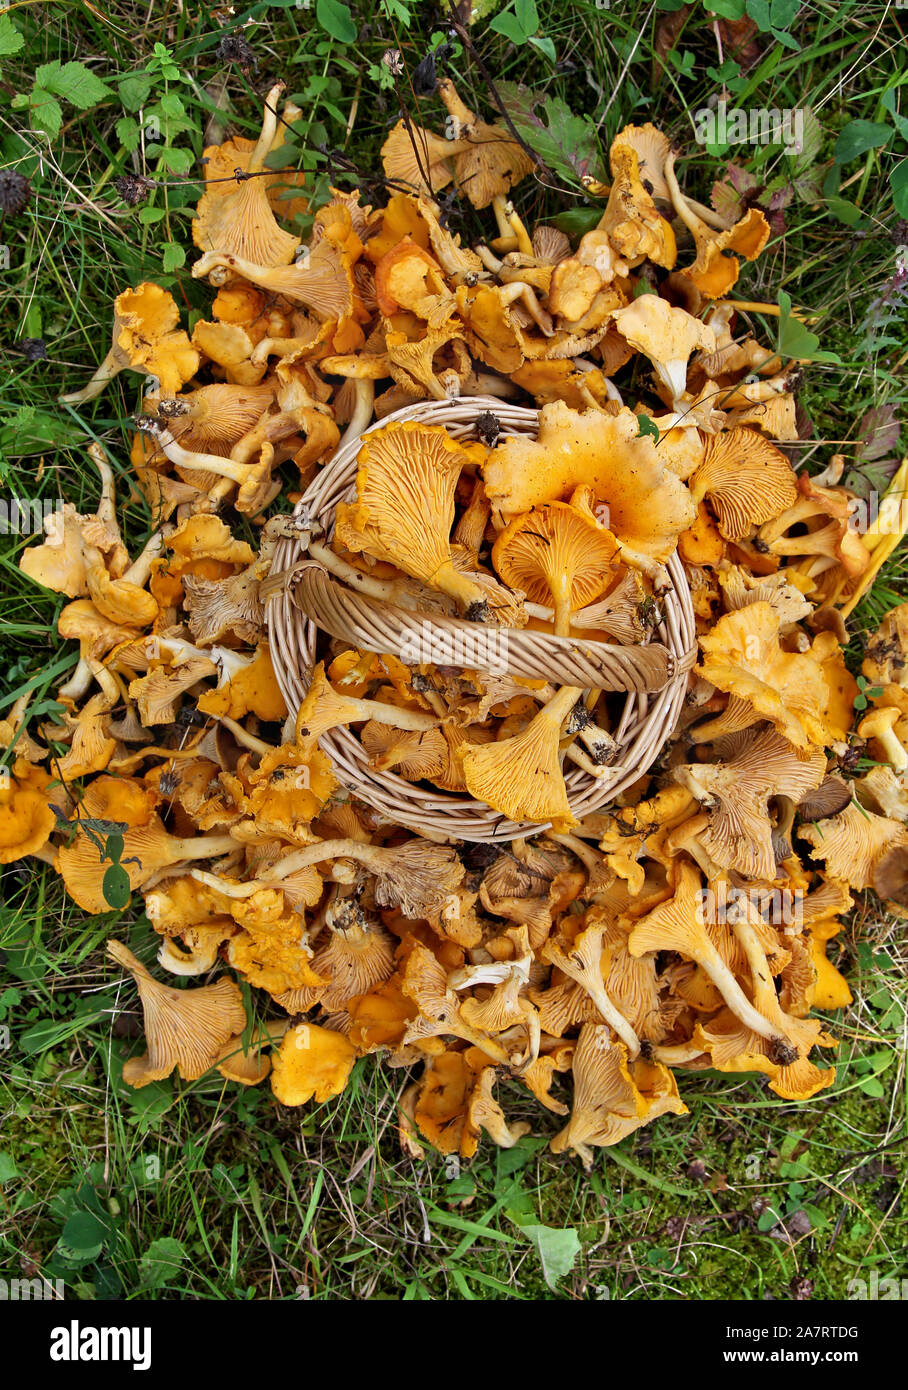 Freshly picked chanterelles (Cantharellus cibarius). Cantharellus cibarius (Latin: cantharellus, 'chanterelle'; cibarius, 'culinary') is a species of golden chanterelle mushroom in the genus Cantharellus. Photo Jeppe Gustafsson Stock Photo